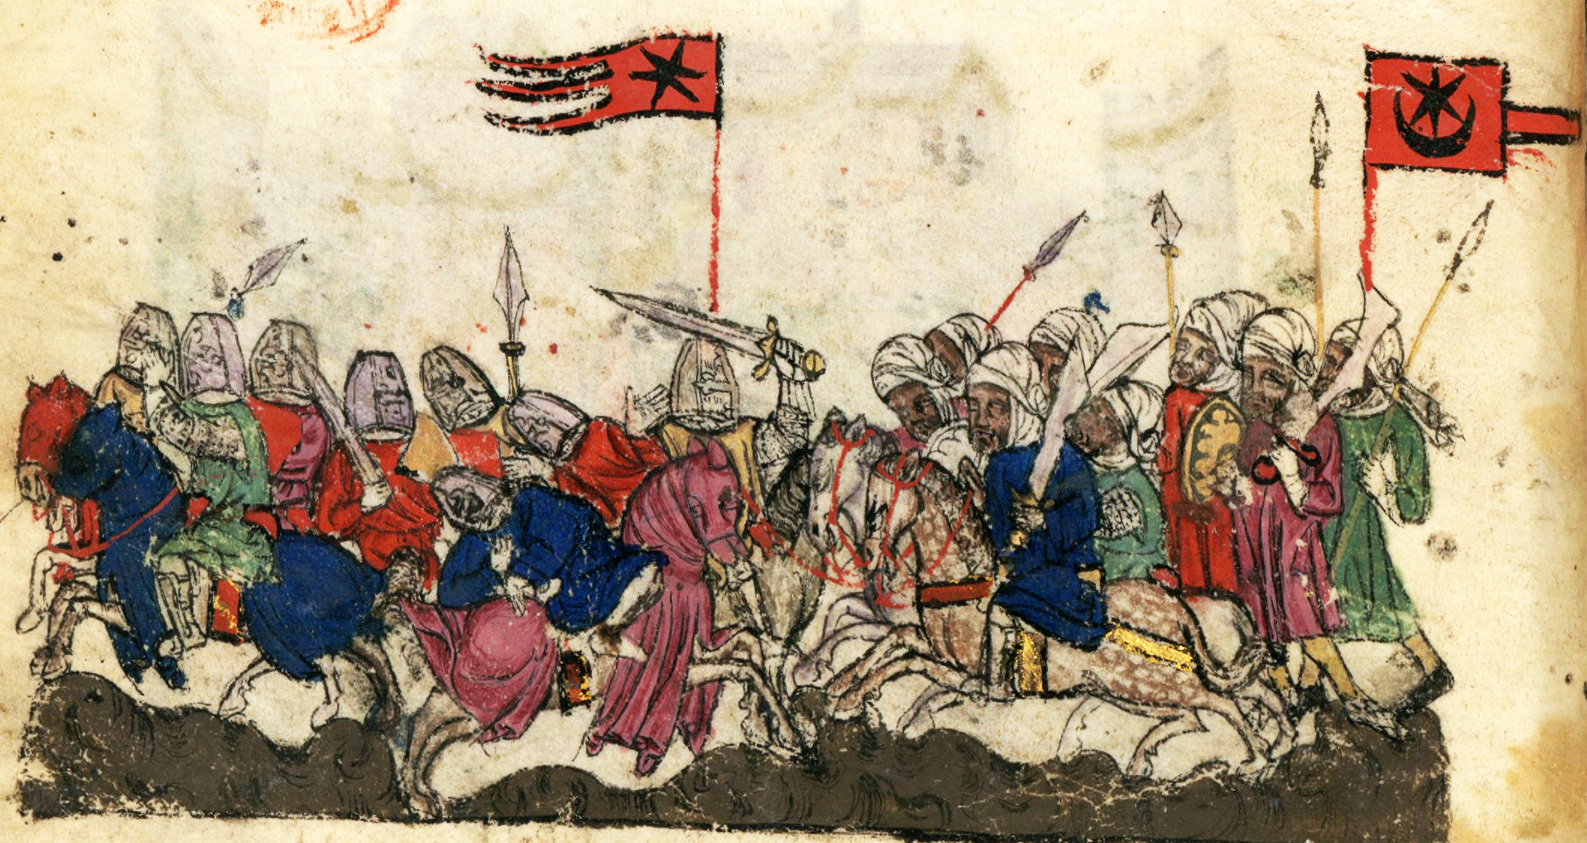 14th-century manuscript illustration depicting the Battle of Yarmouk. Saracen warriors, identified by a star and crescent on their banners, face off against Byzantine soldiers dressed in Crusader armor, carrying flags adorned with a star. Both groups are shown in vibrant colors, engaged in intense combat, with intricately detailed armor and weapons.